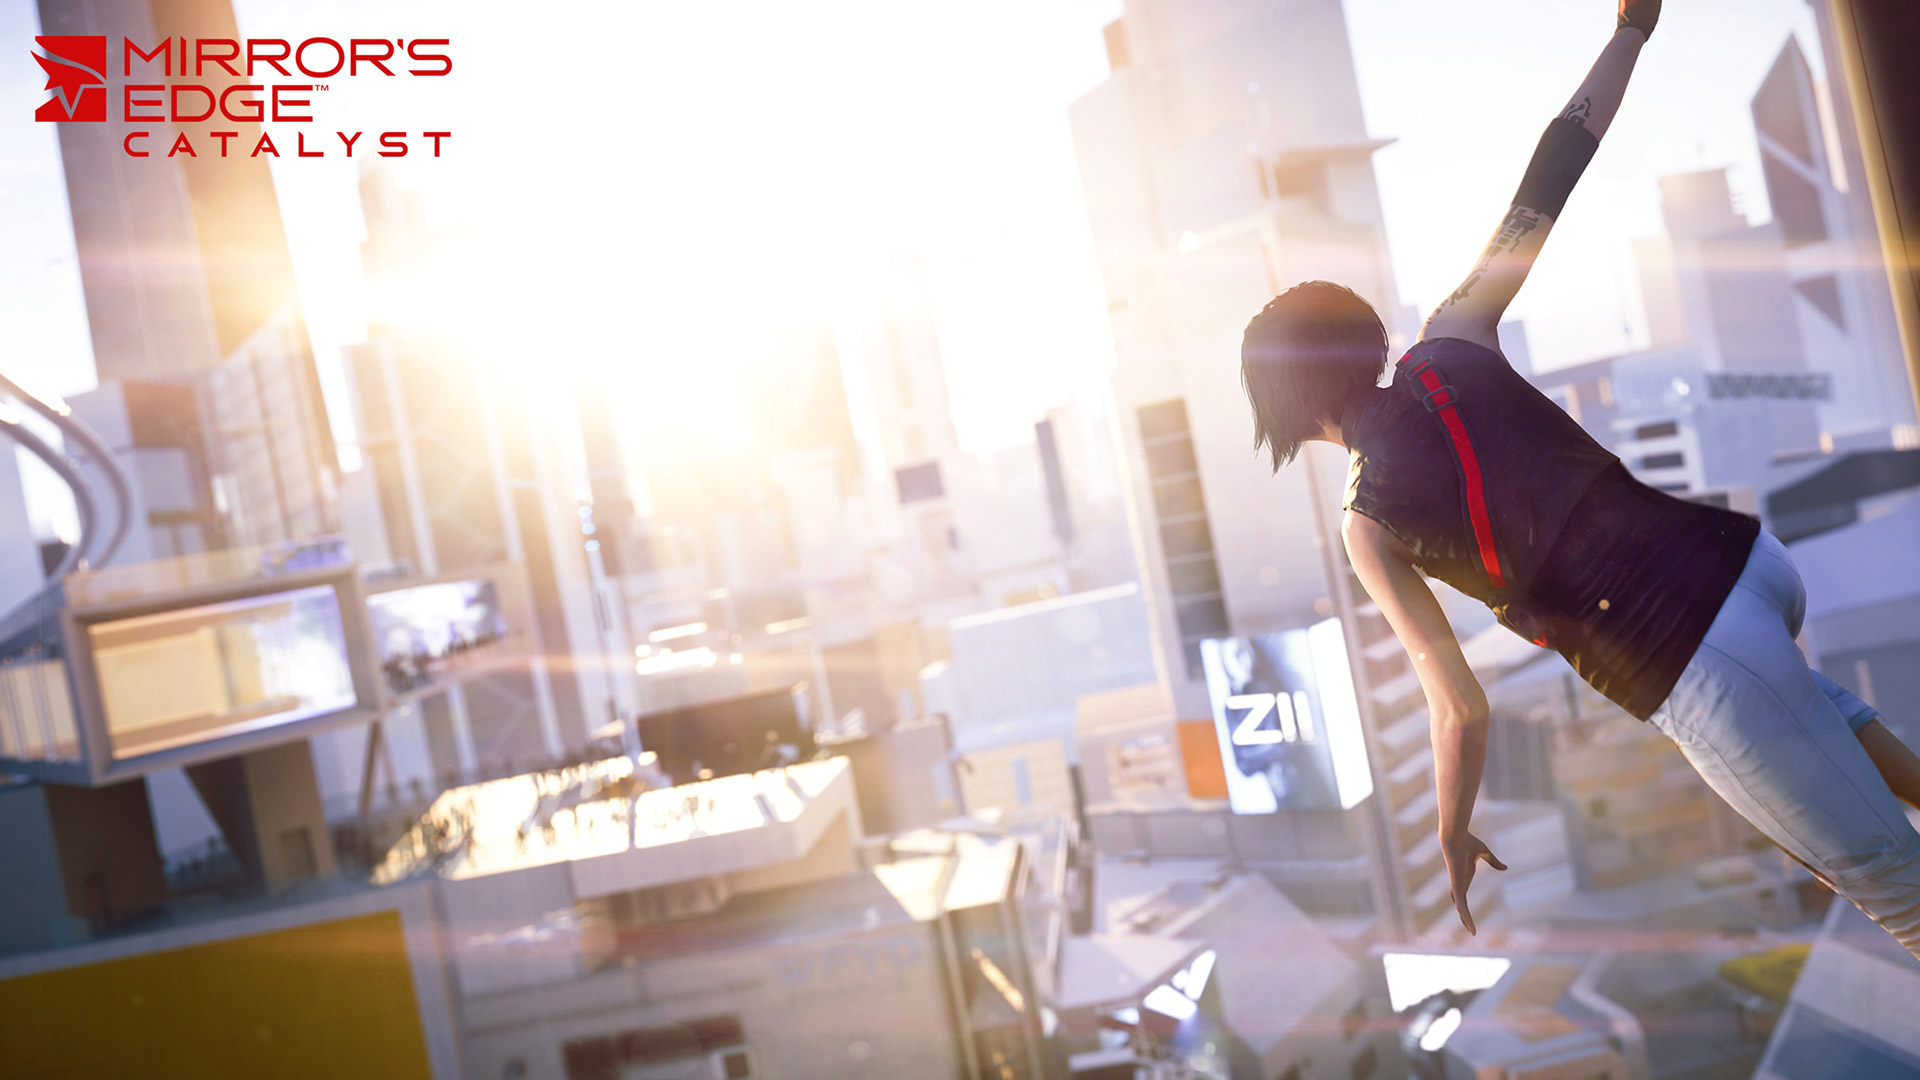 “Mirror’s Edge Catalyst” Delayed - Pushed Back for Quality Insurance